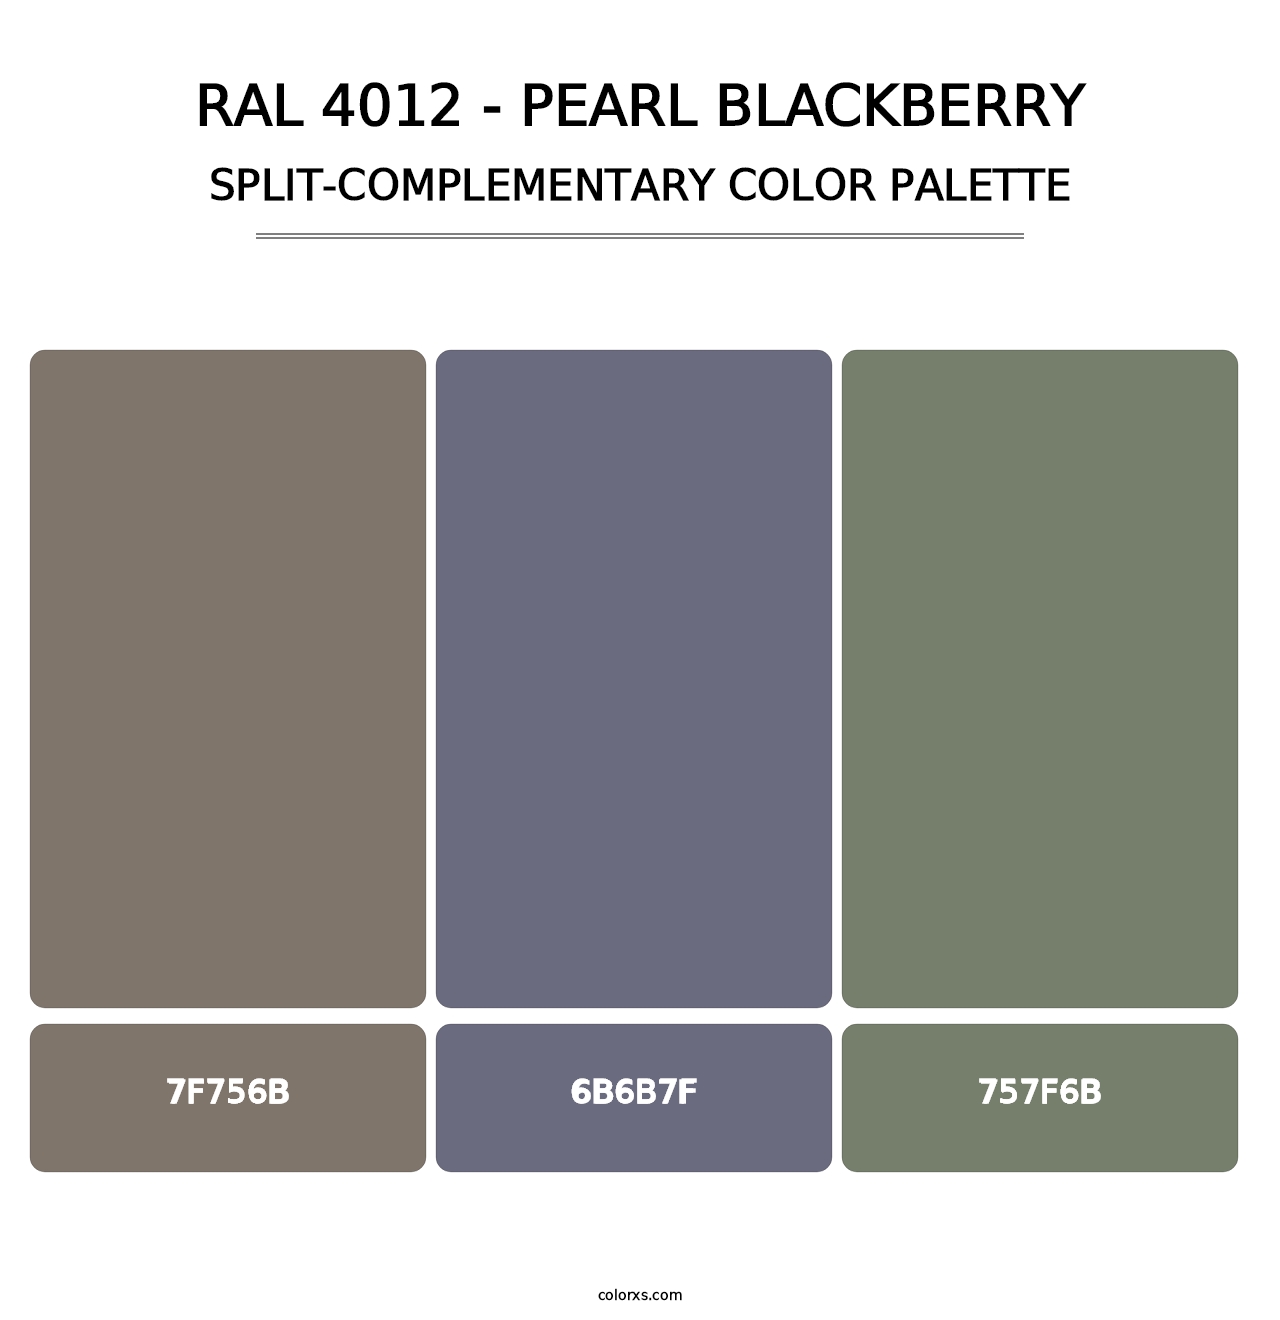 RAL 4012 - Pearl Blackberry - Split-Complementary Color Palette